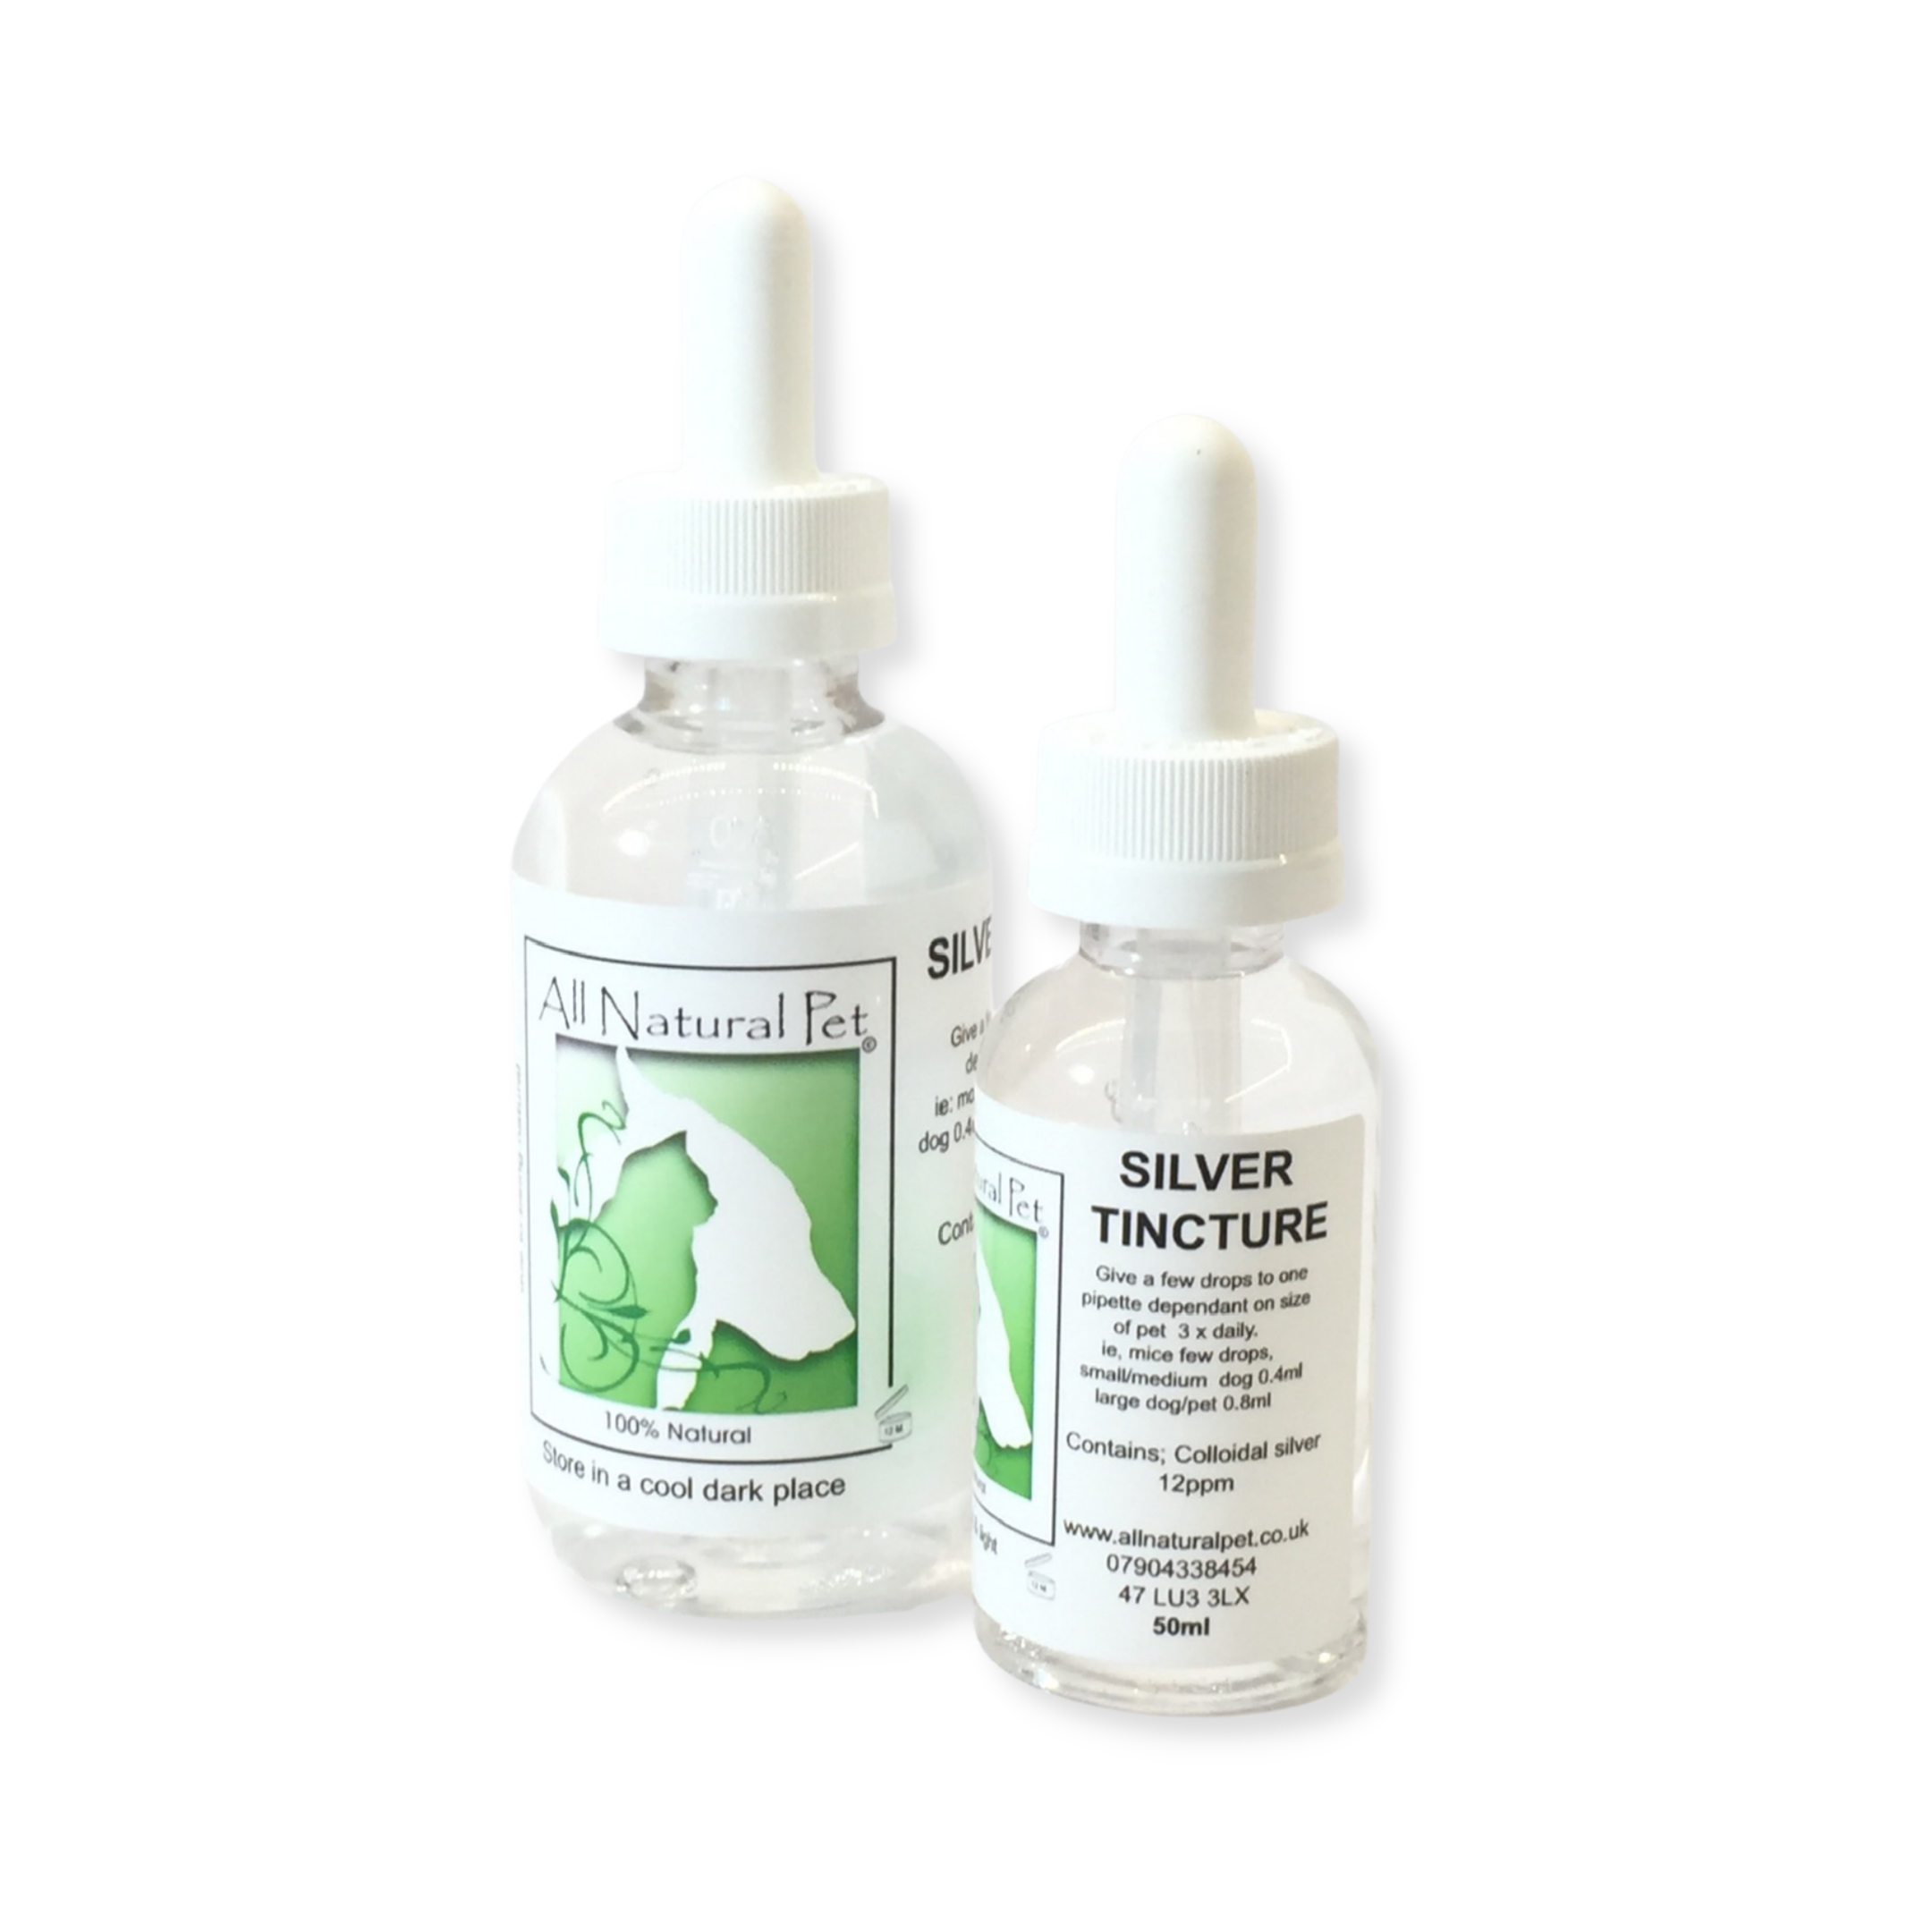 Two small bottles containing clear liquid made of natural ingredients with white pipette lids to dispense the liquids